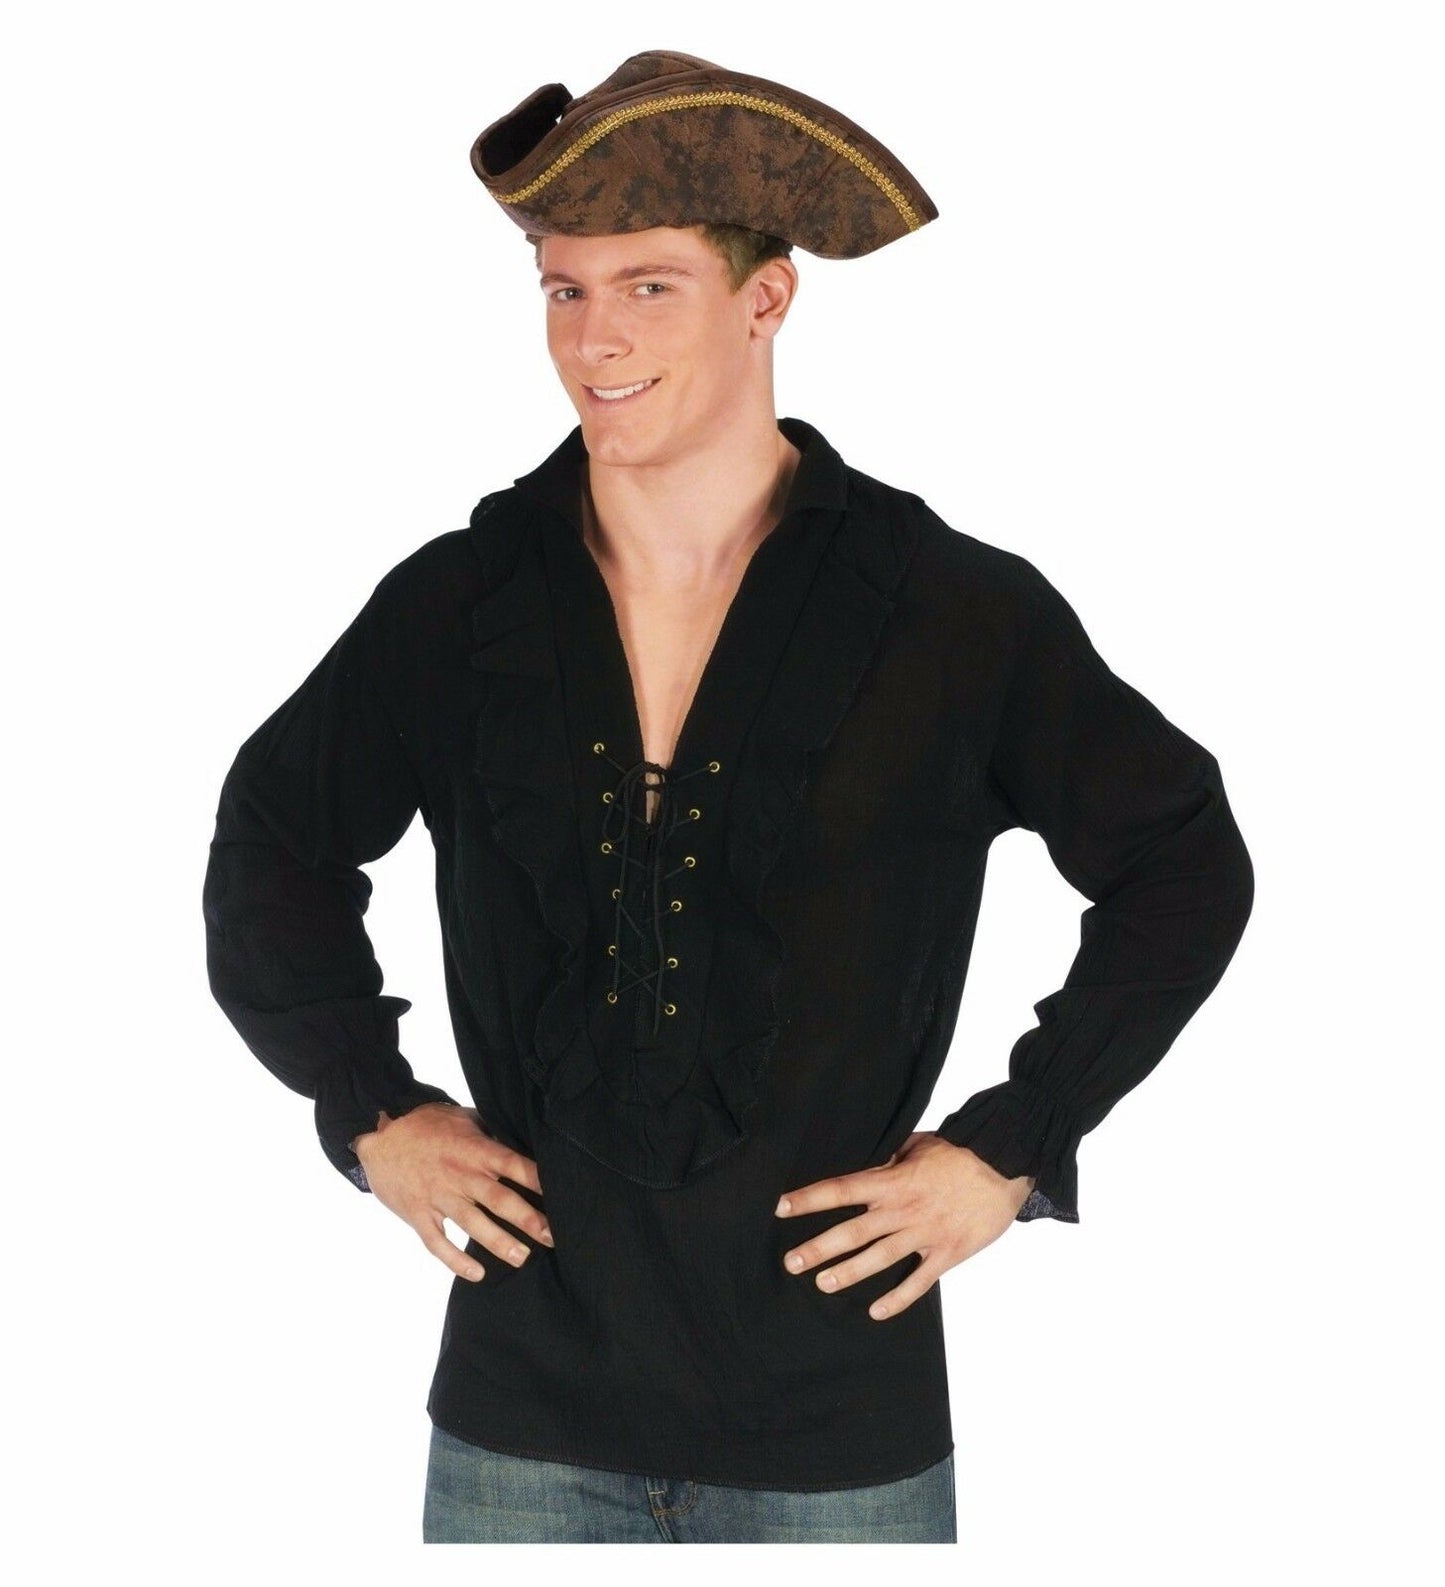 Swashbuckler Pirate Vampire Shirt Adult Costume Accessory, Black Lace-up shirt